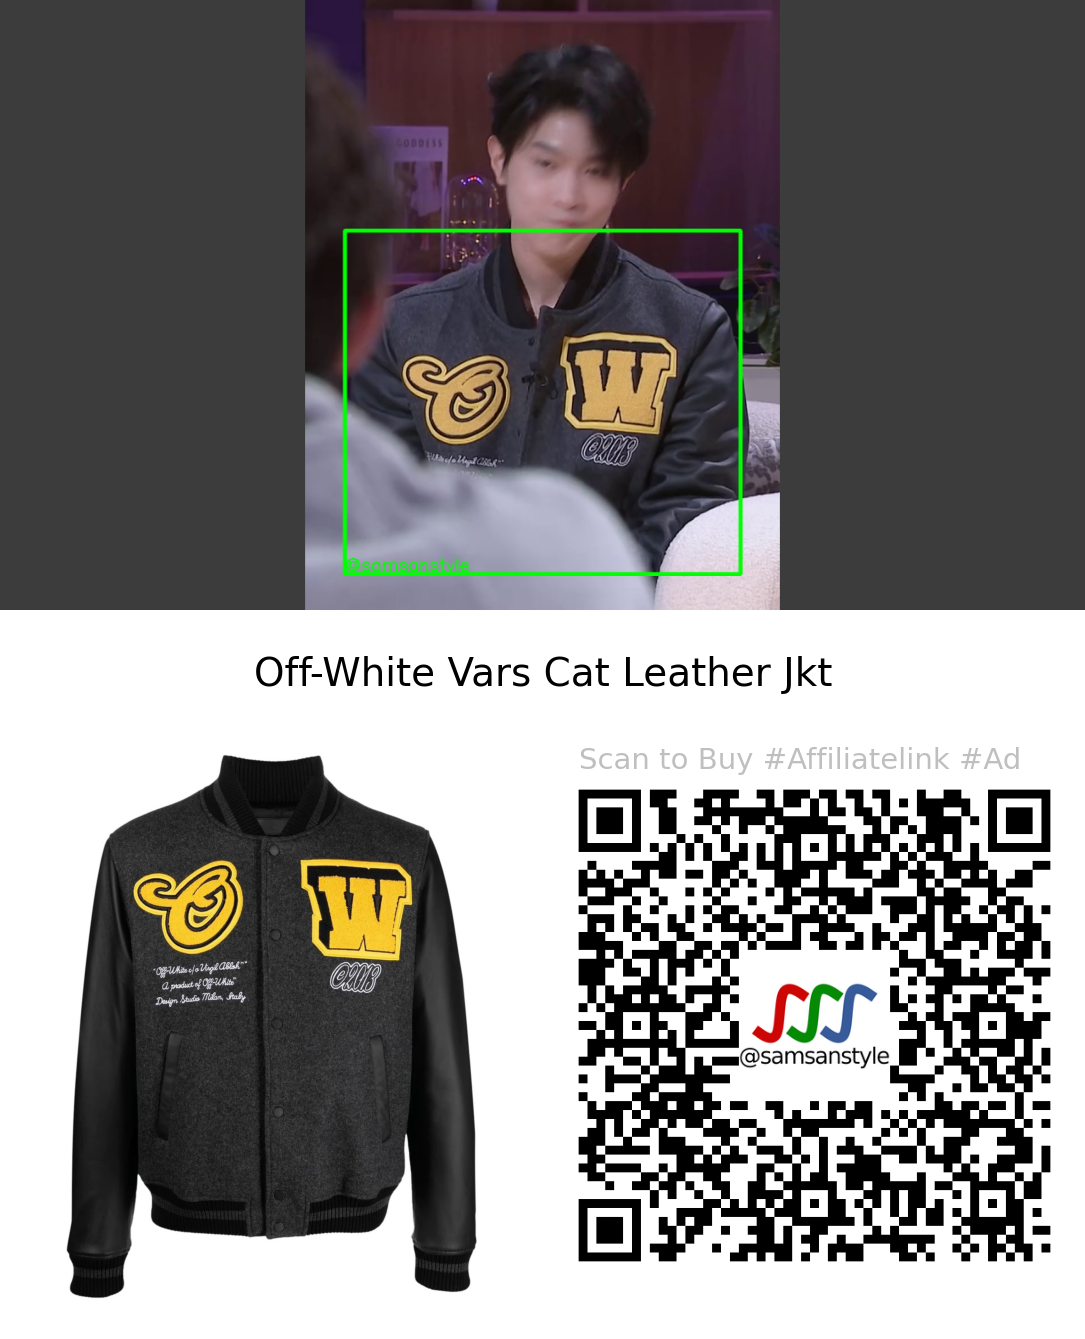 Victor Ma | Heart Signal 6 CN S06E15 | Off-White Vars Cat Leather Jkt